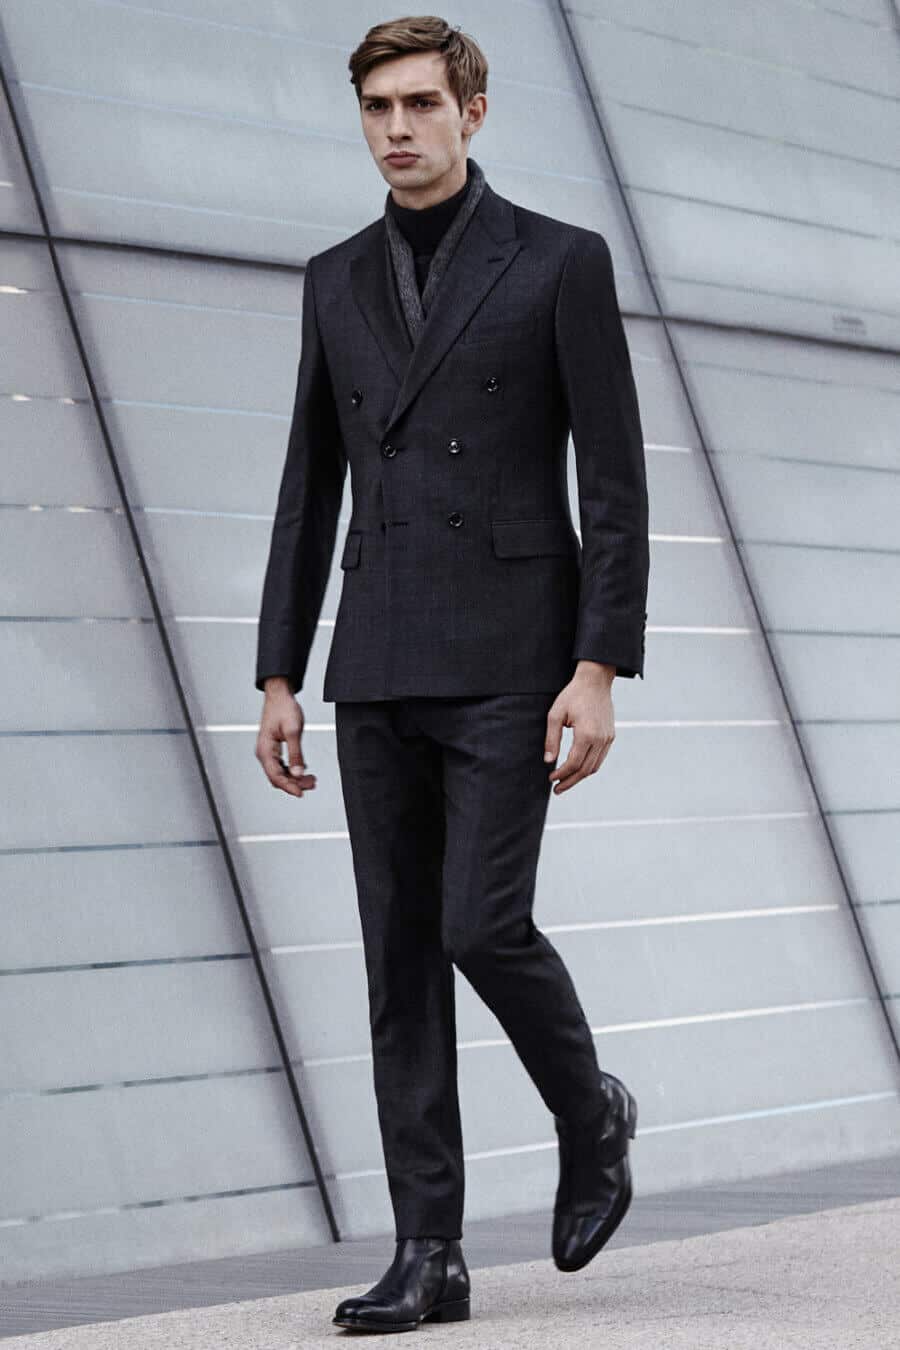 Men's charcoal suit with black boots and black turtleneck outfit